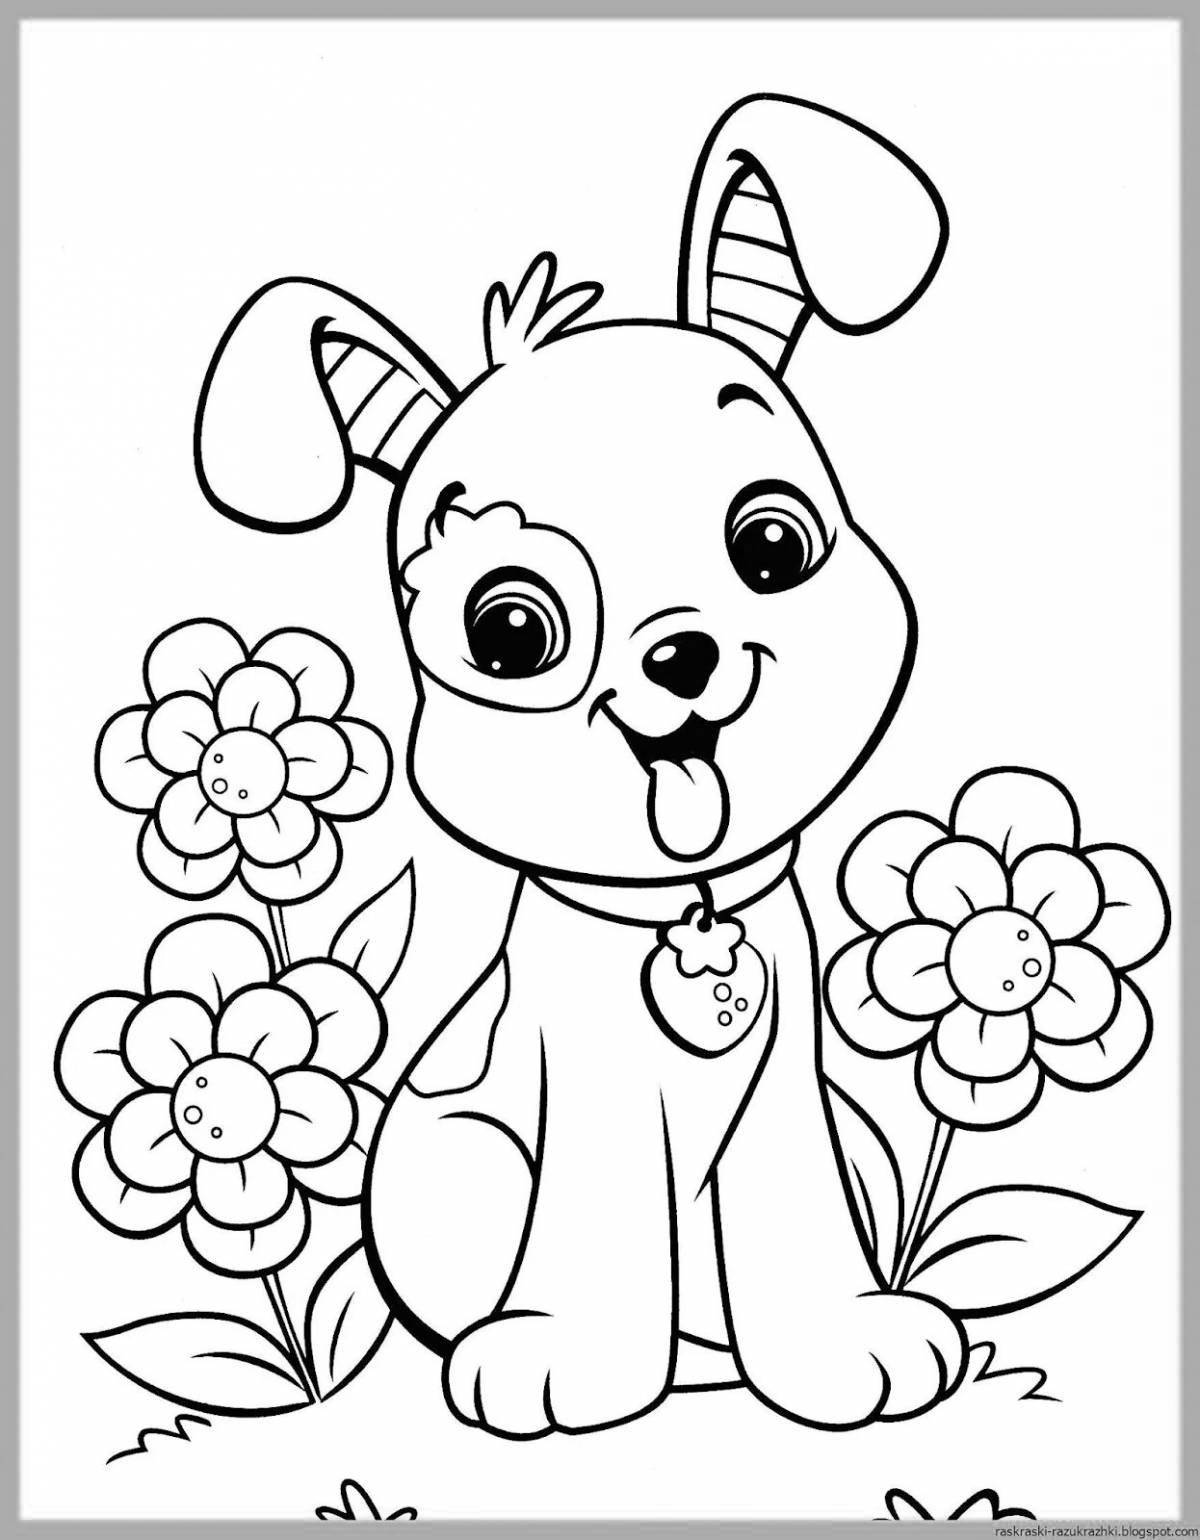 Attractive coloring book for children 5-6 years old for girls animals